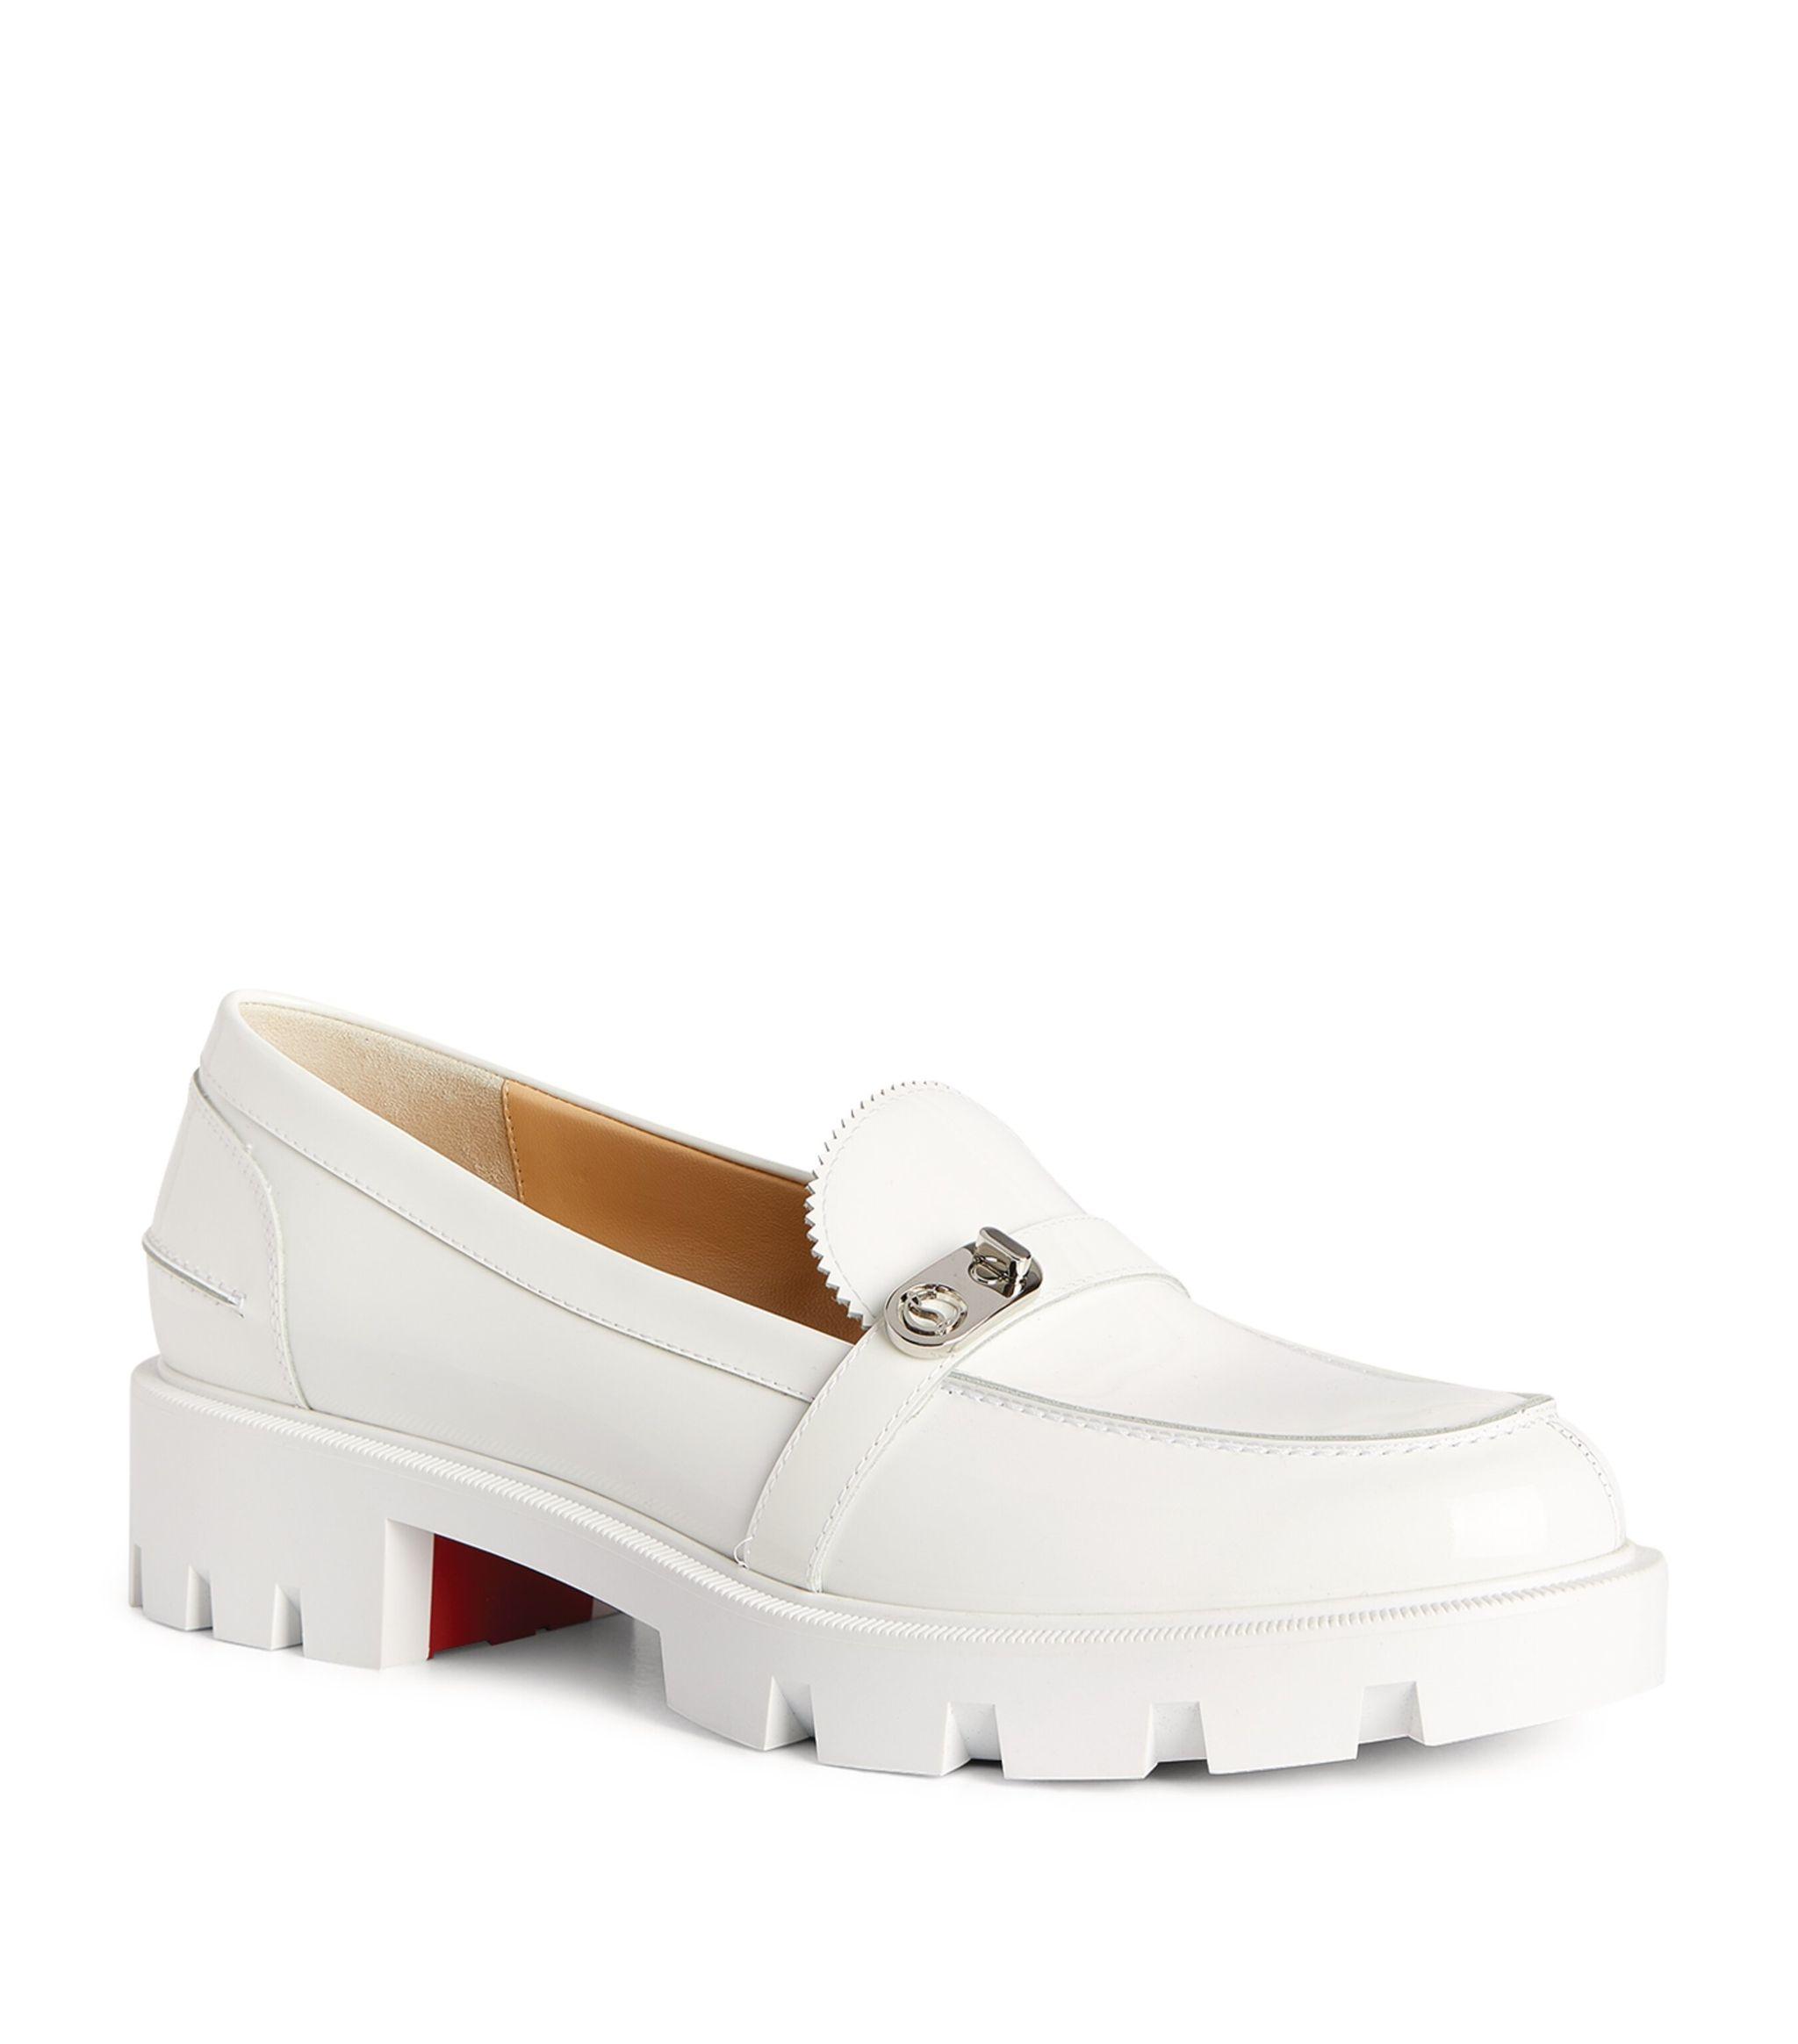 Christian Louboutin Leather Patent Lock Woody Loafers in White | Lyst